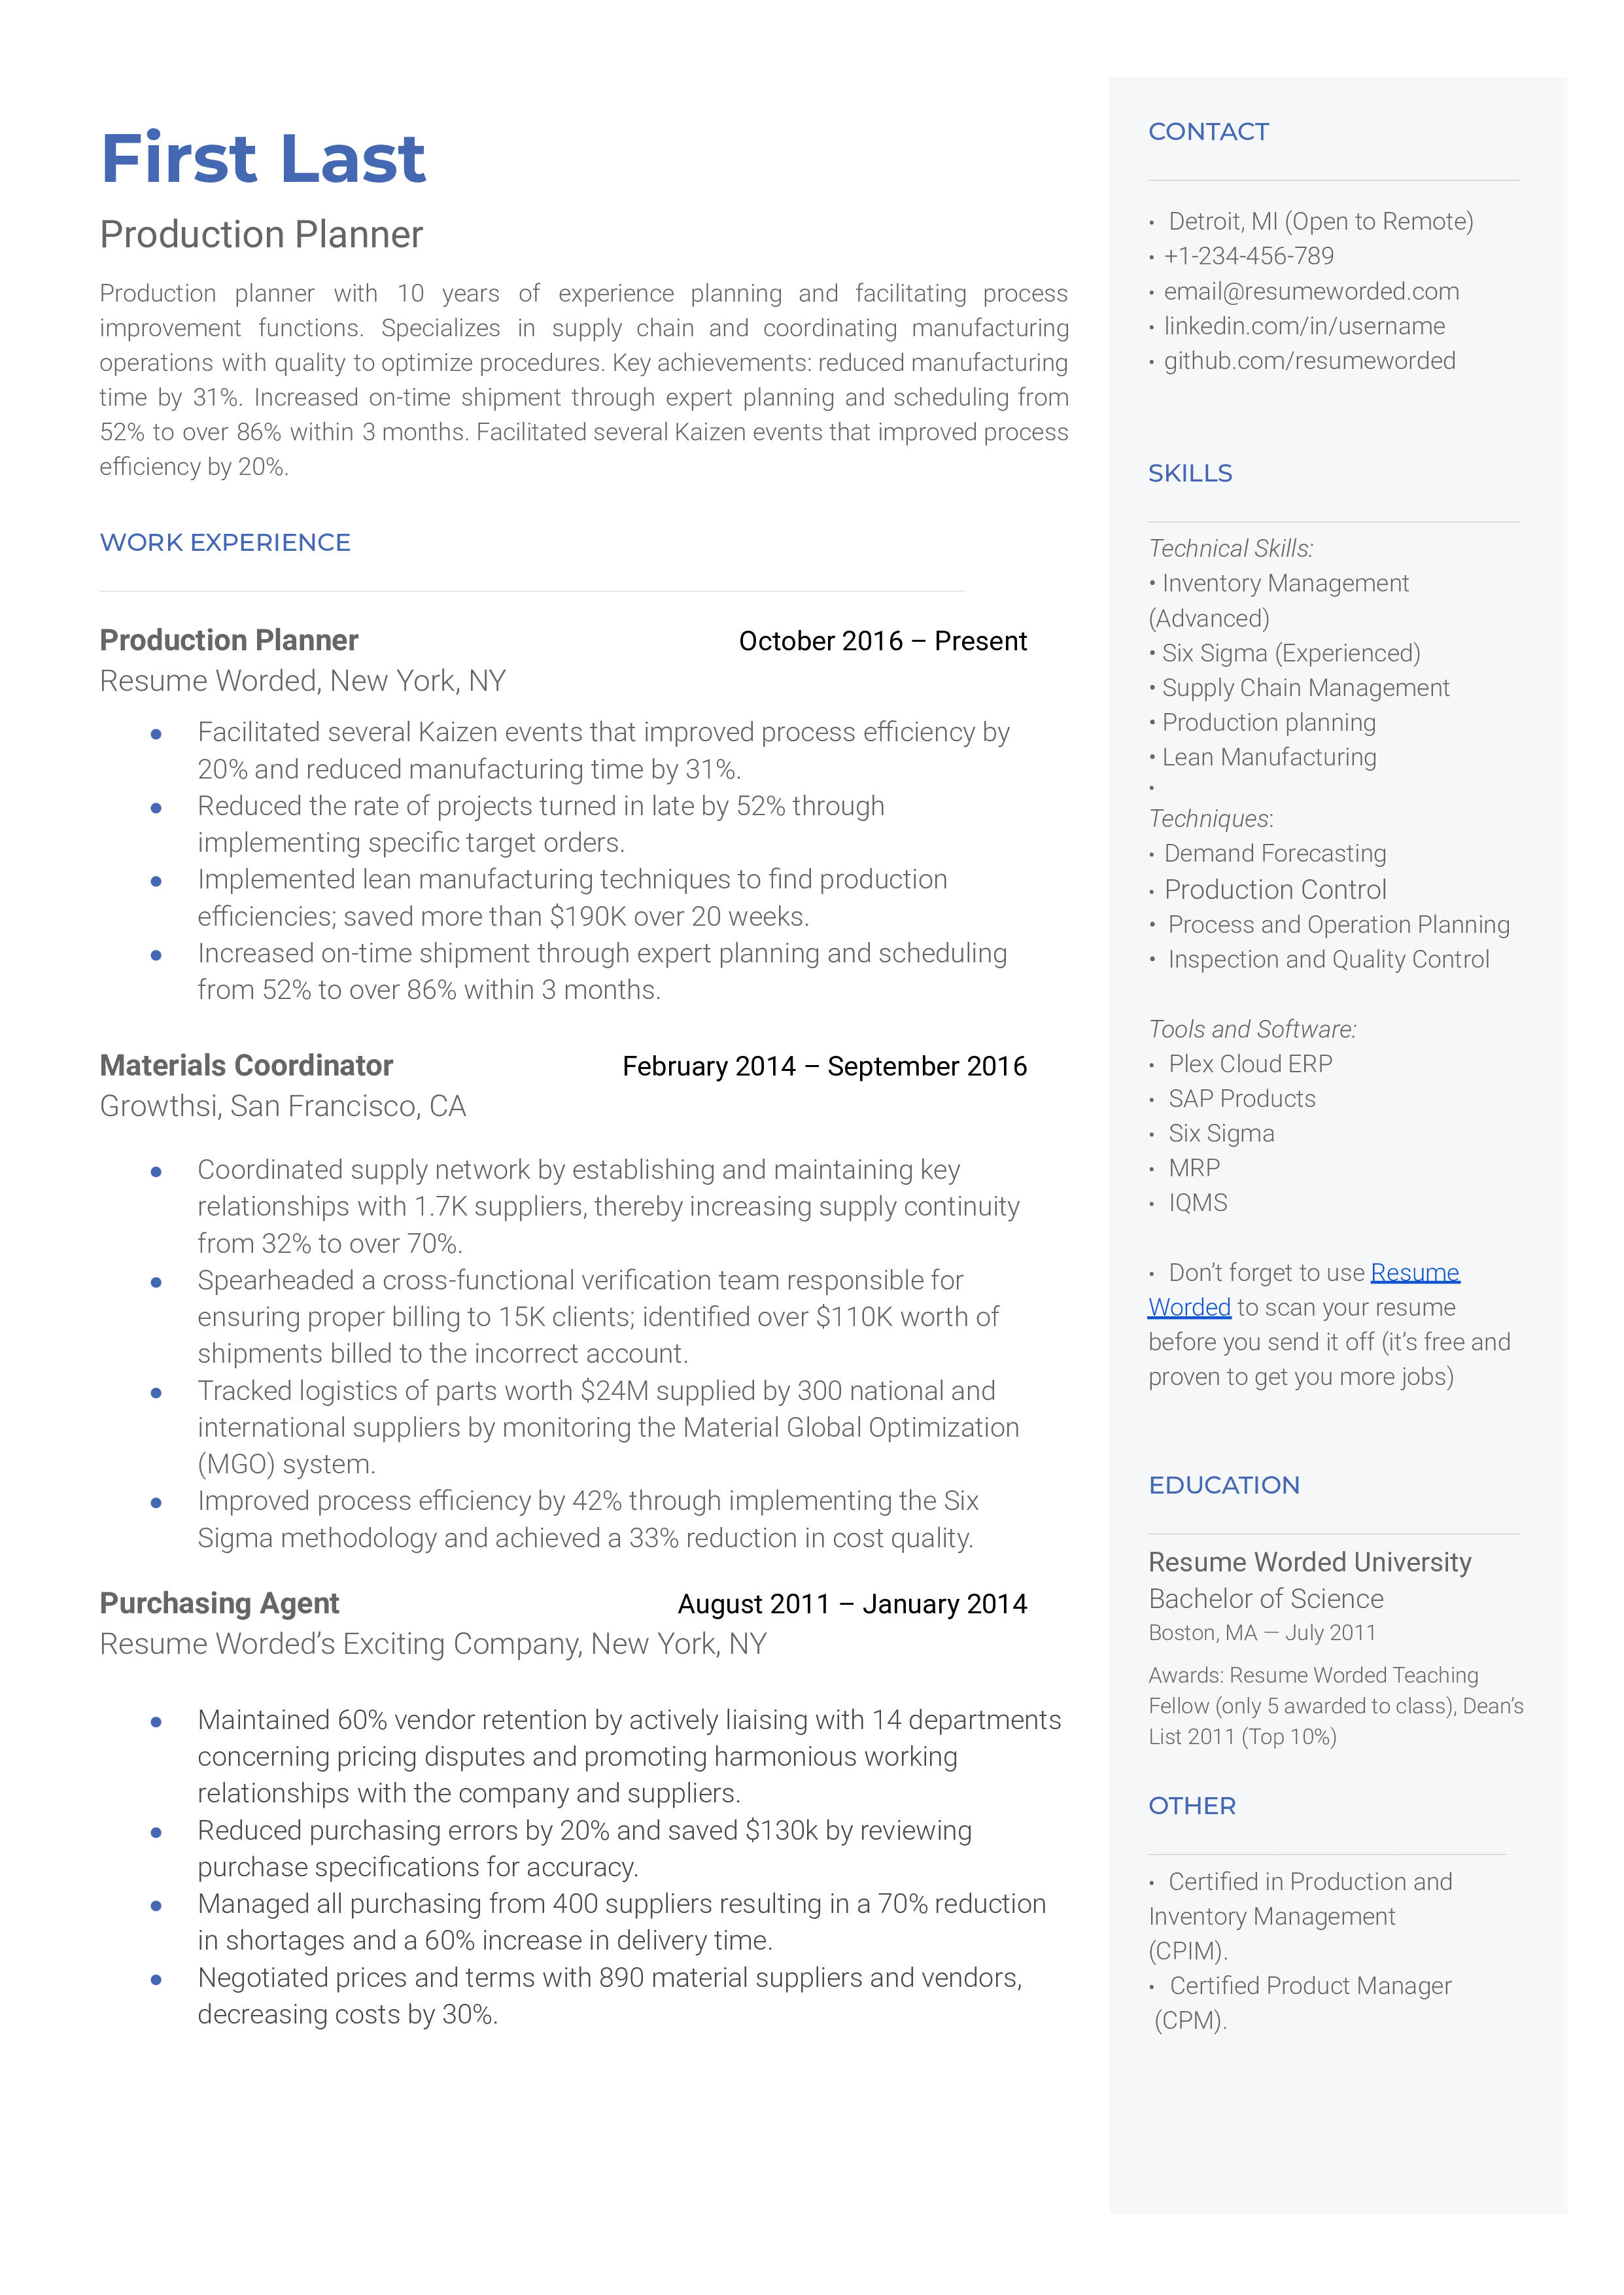 A production planner resume template that emphasizes relevant experience